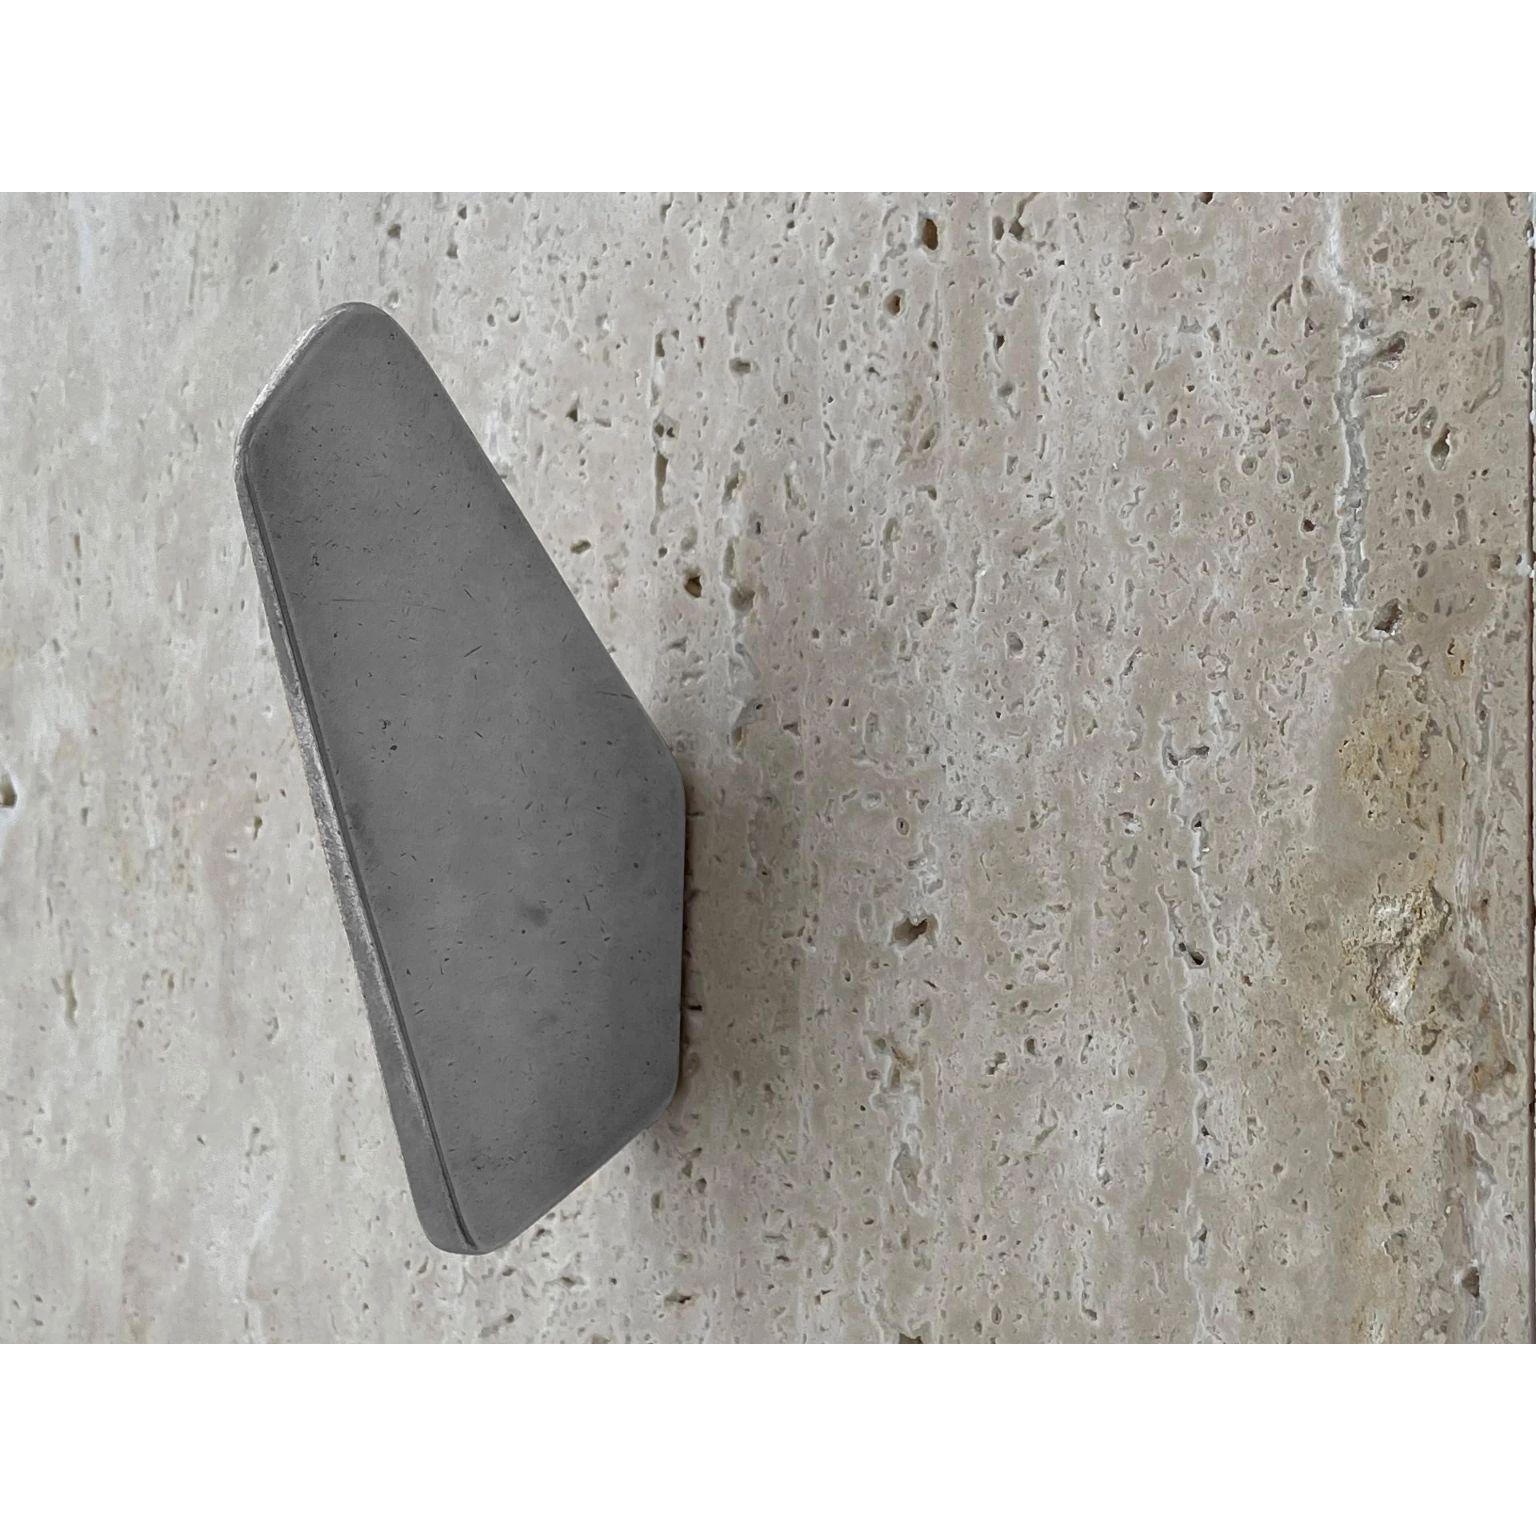 Aluminium Gio Hook by Henry Wilson
Dimensions: D 7.4 x W 1.5 x H 12 cm
Materials: Aluminium 

The Gio Hook is sand cast in Aluminium. Named after Signor Ponti, forever an inspiration.
Our Hooks are manufactured in small batches so slight variations